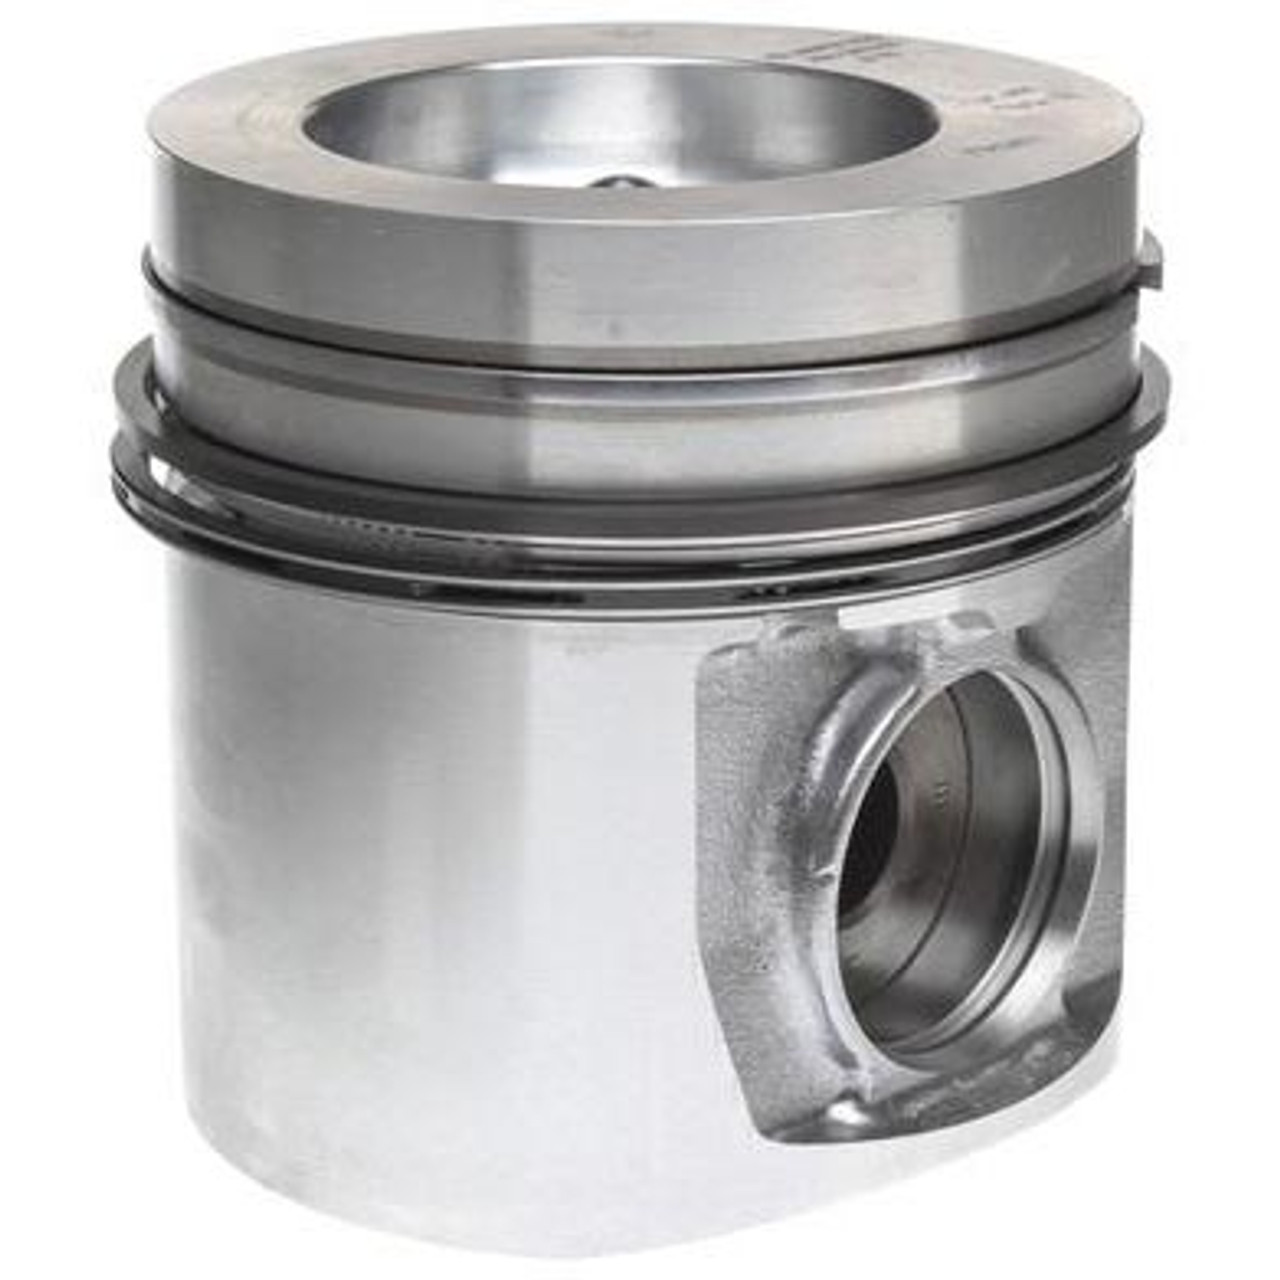 Mahle Piston With Rings (.040) 1991 to 1993 5.9L Cummins (Intercooled Models Only) (MCI224-3523WR.040)-Main View